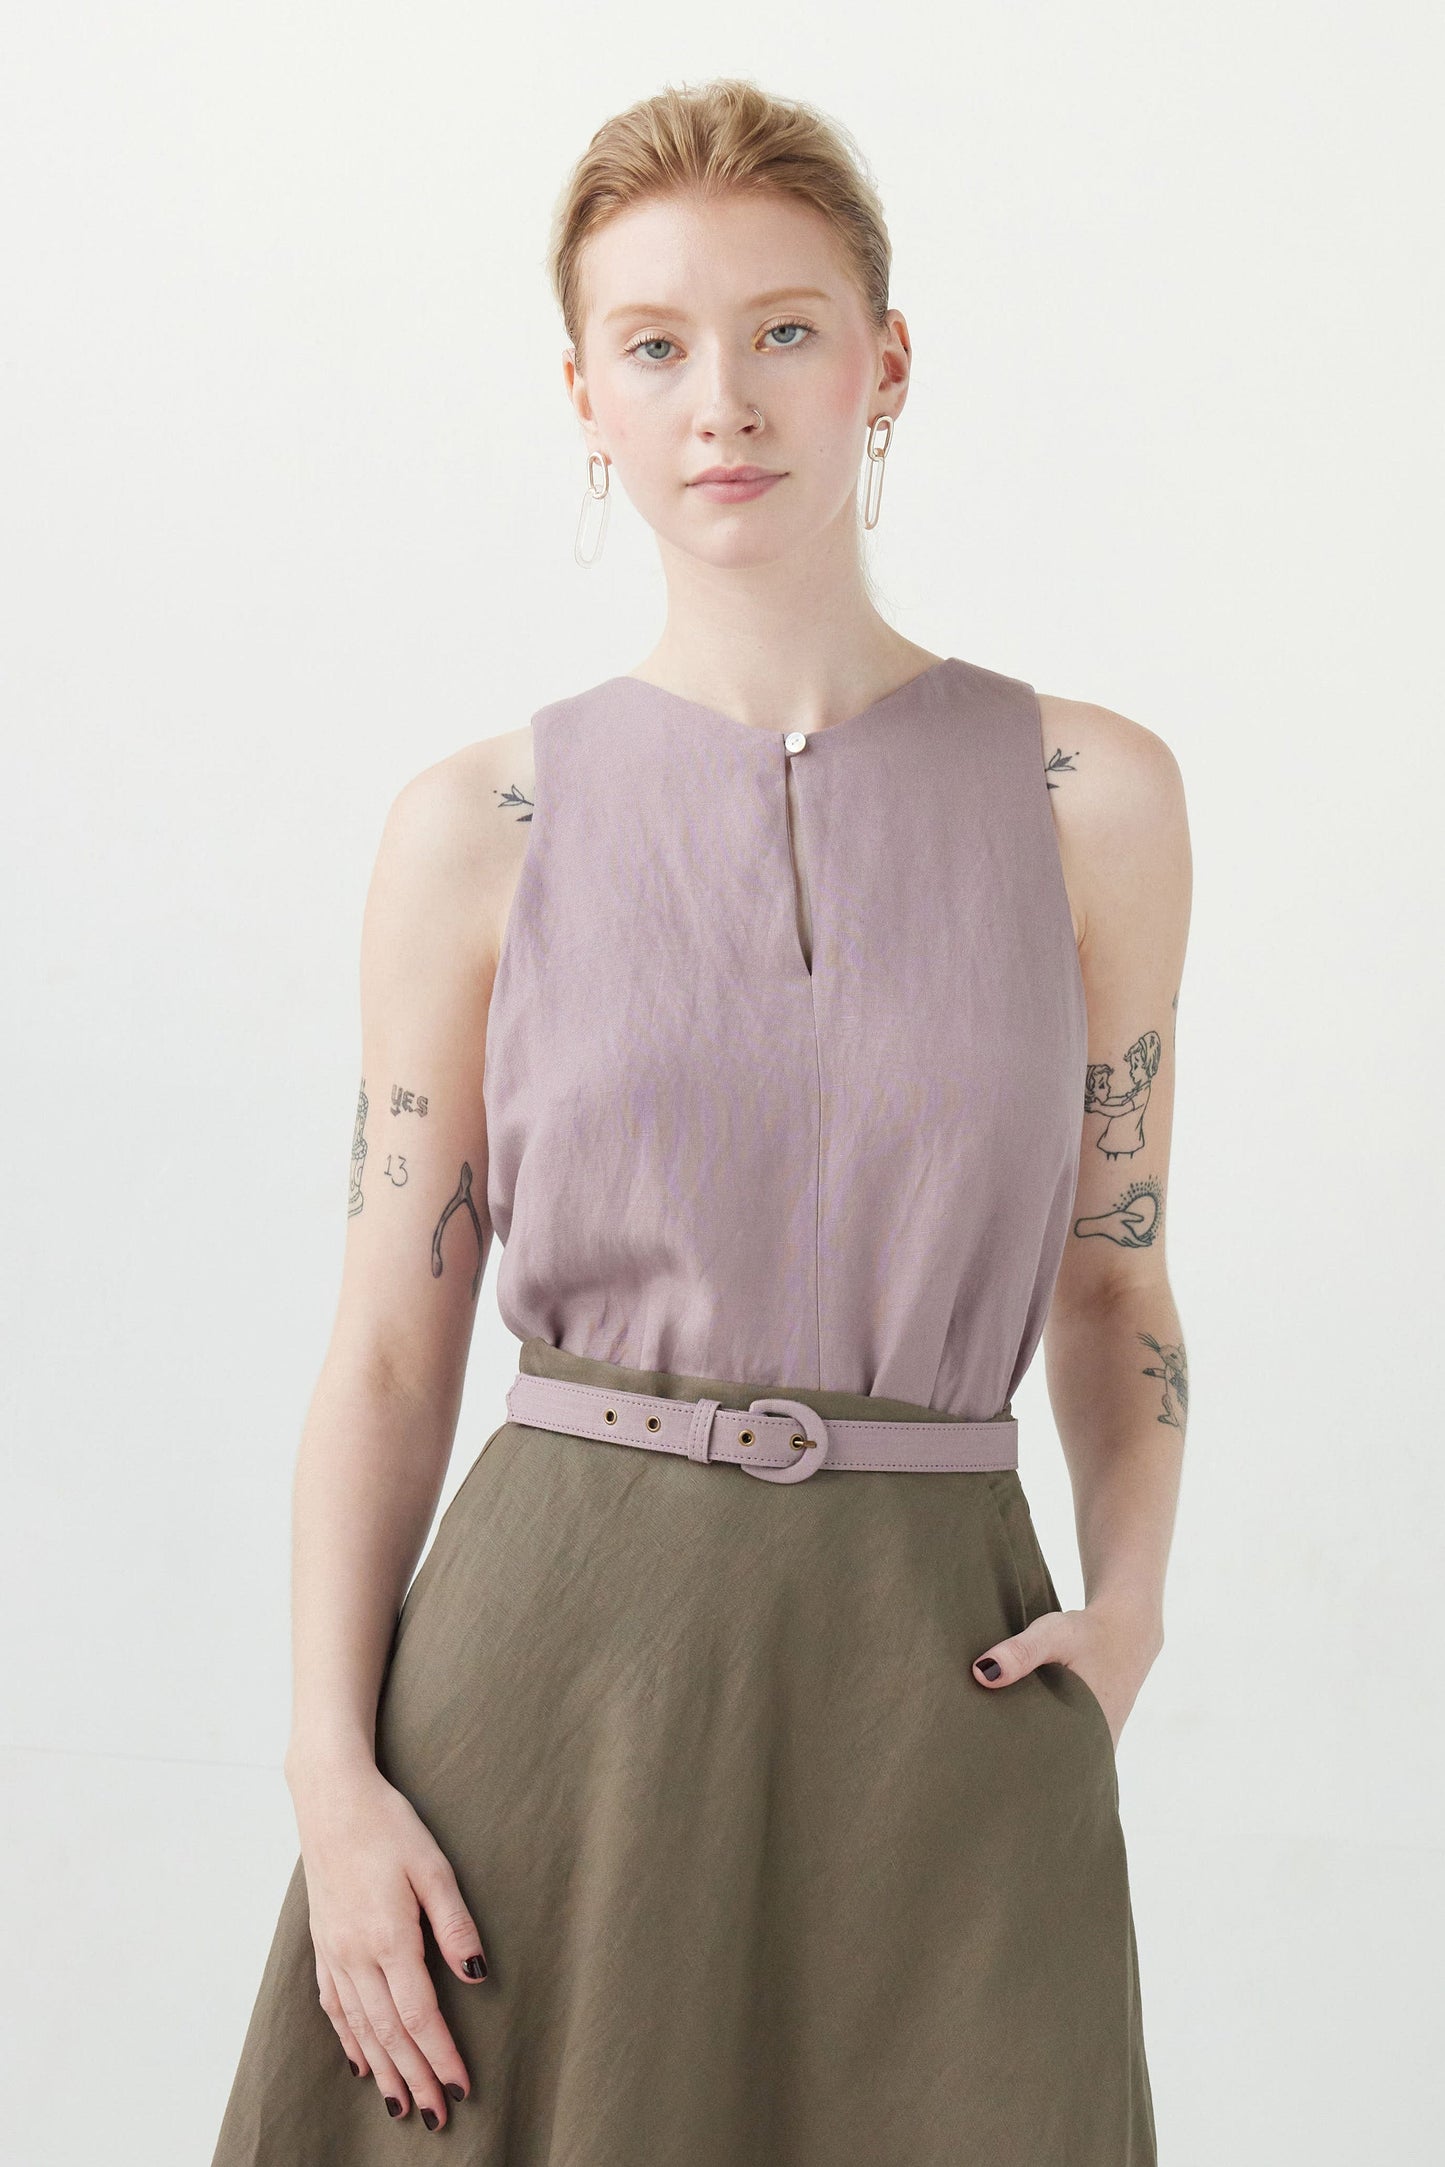 Ina Tank in Linen Blend Tops CHRISTINE ALCALAY   